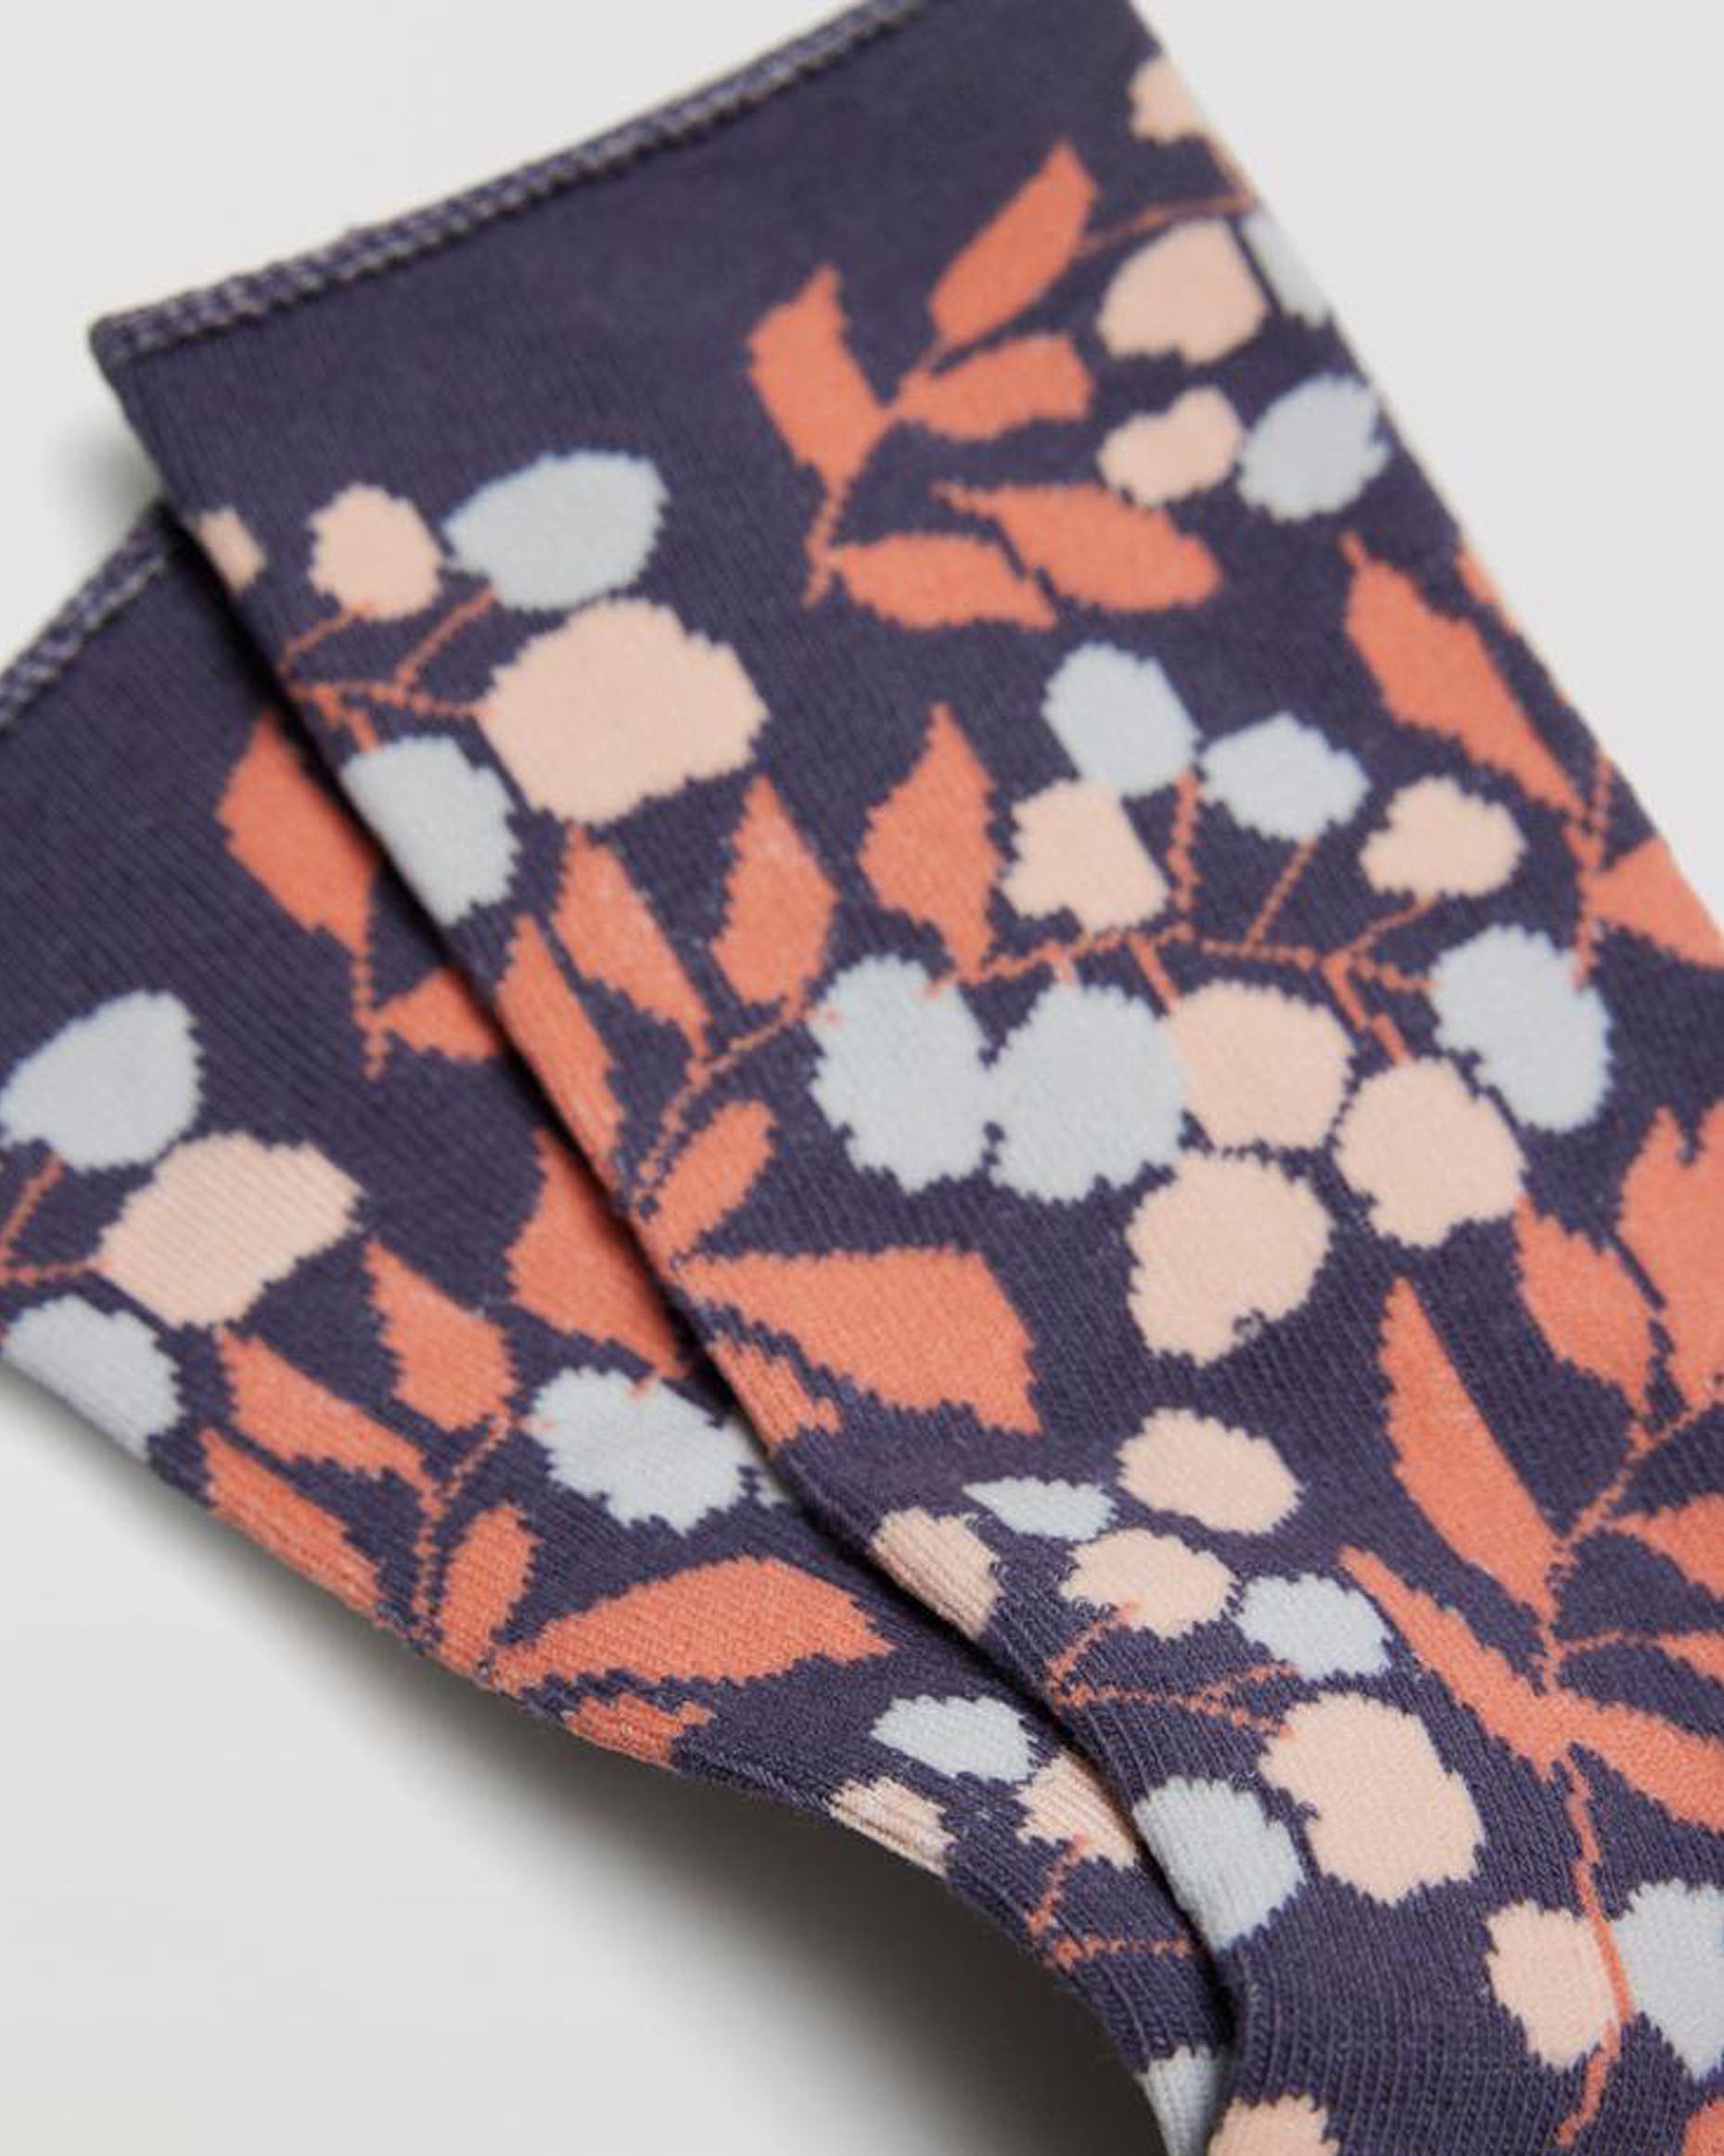 Ysabel Mora 12876 Floral Leaf Sock - Denim blue cotton crew socks with an all over leaf and floral pattern in shades of peach and light blue and no cuff soft edge roll.